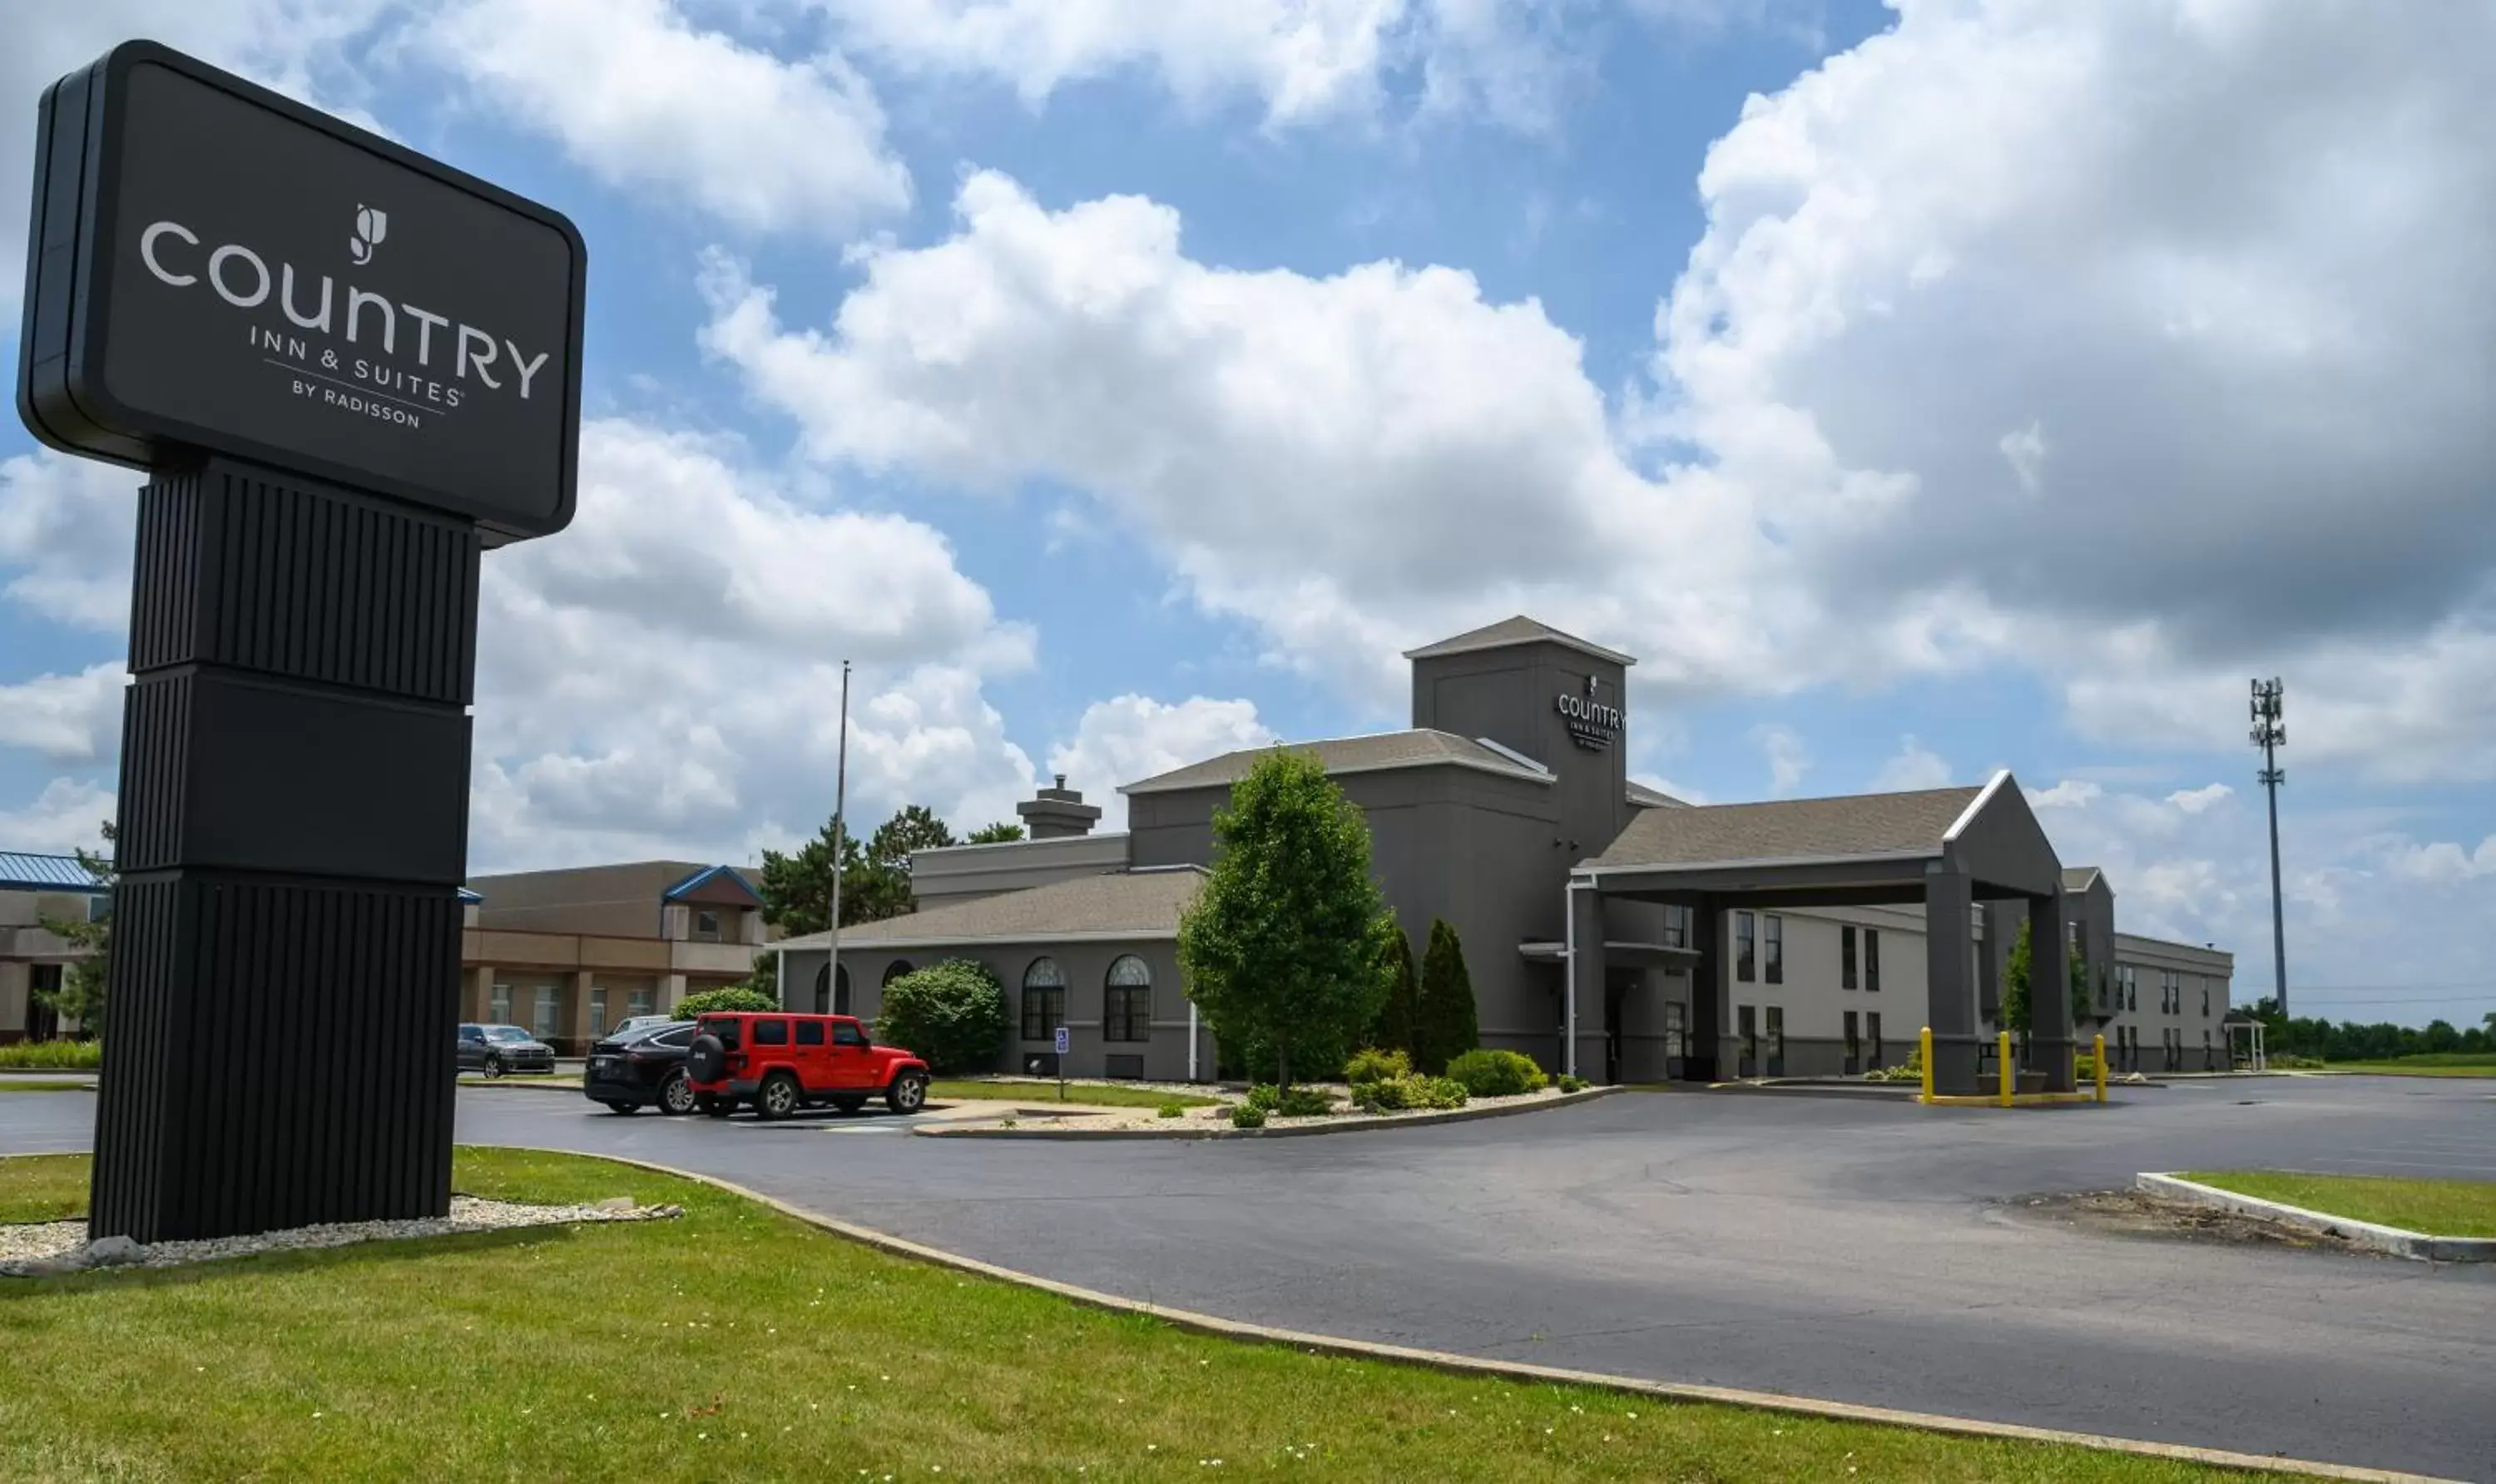 Property Building in Country Inn & Suites by Radisson, Greenfield, IN